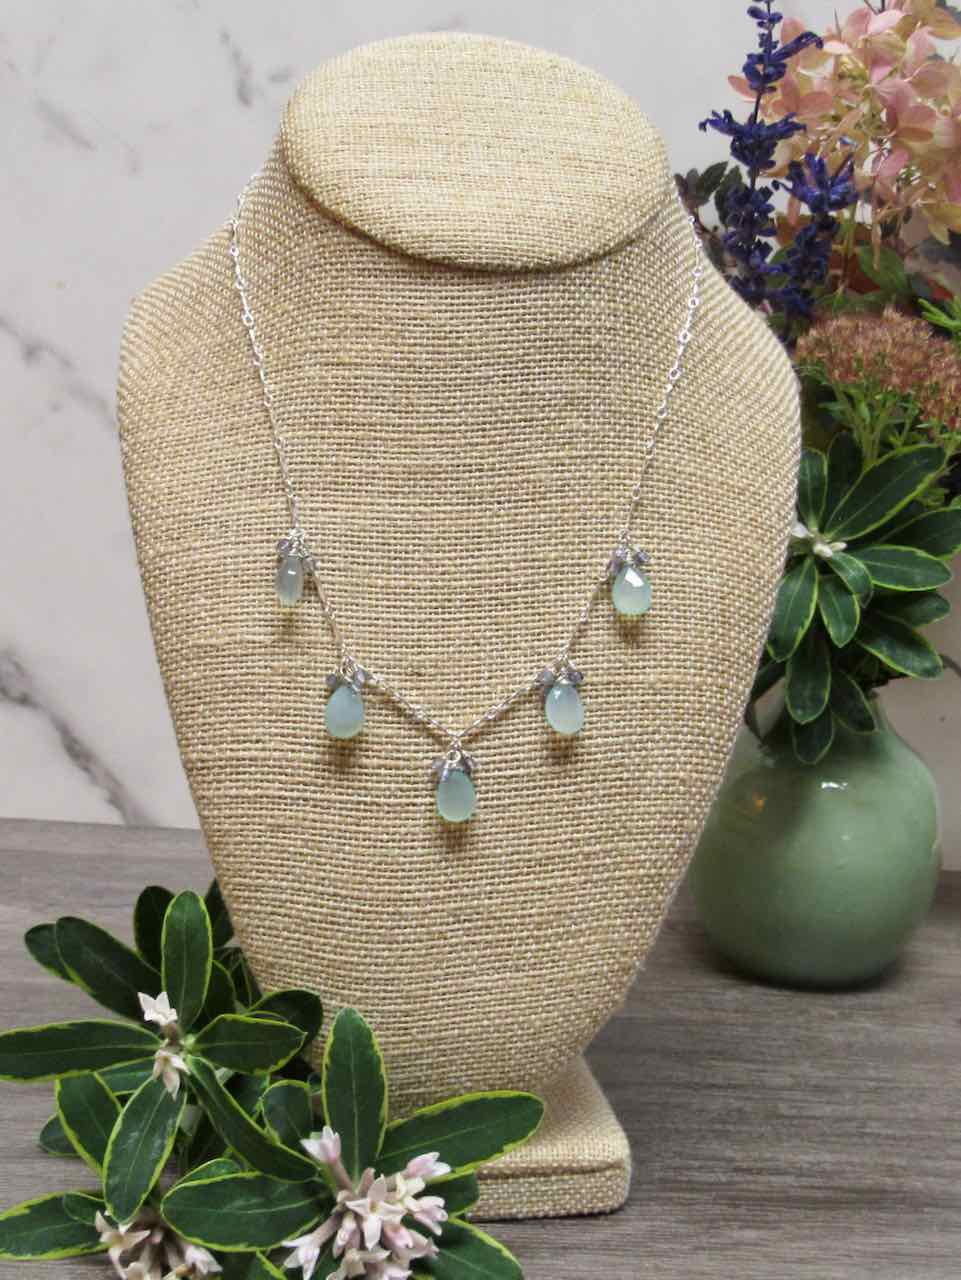 Chalcedony Drop Necklace